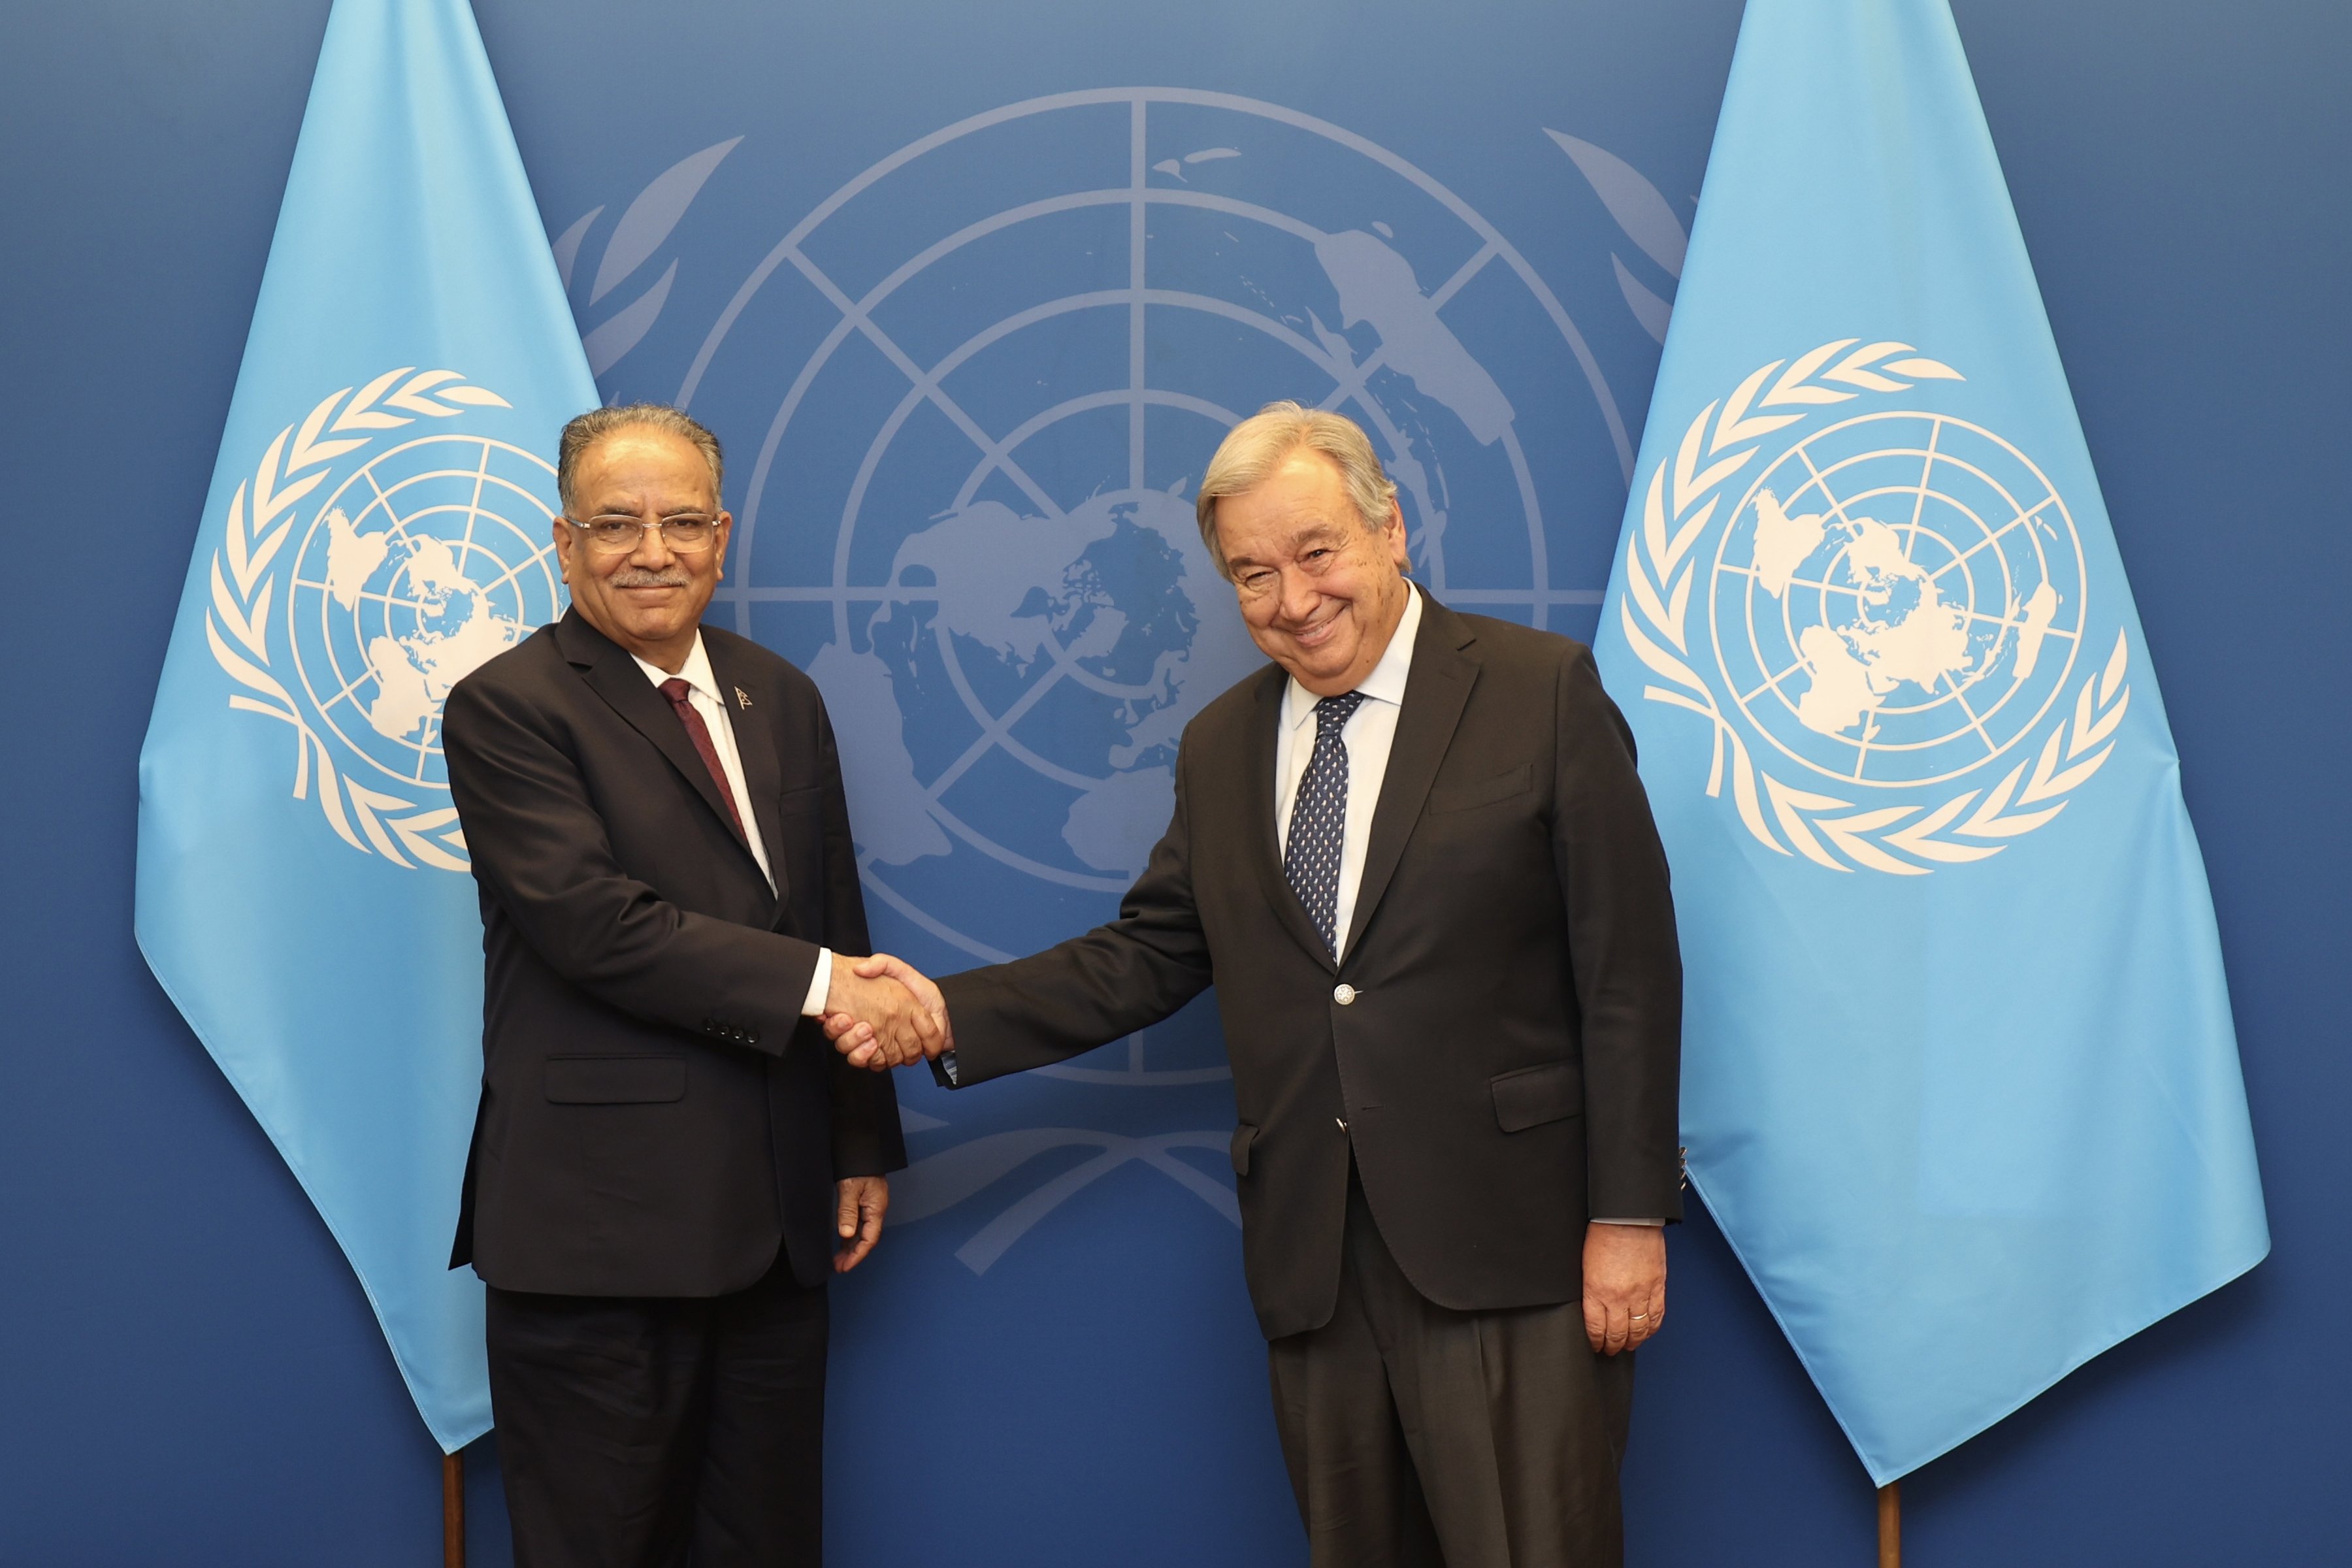 PM Dahal in NYC: Meets with UNSC Guterres